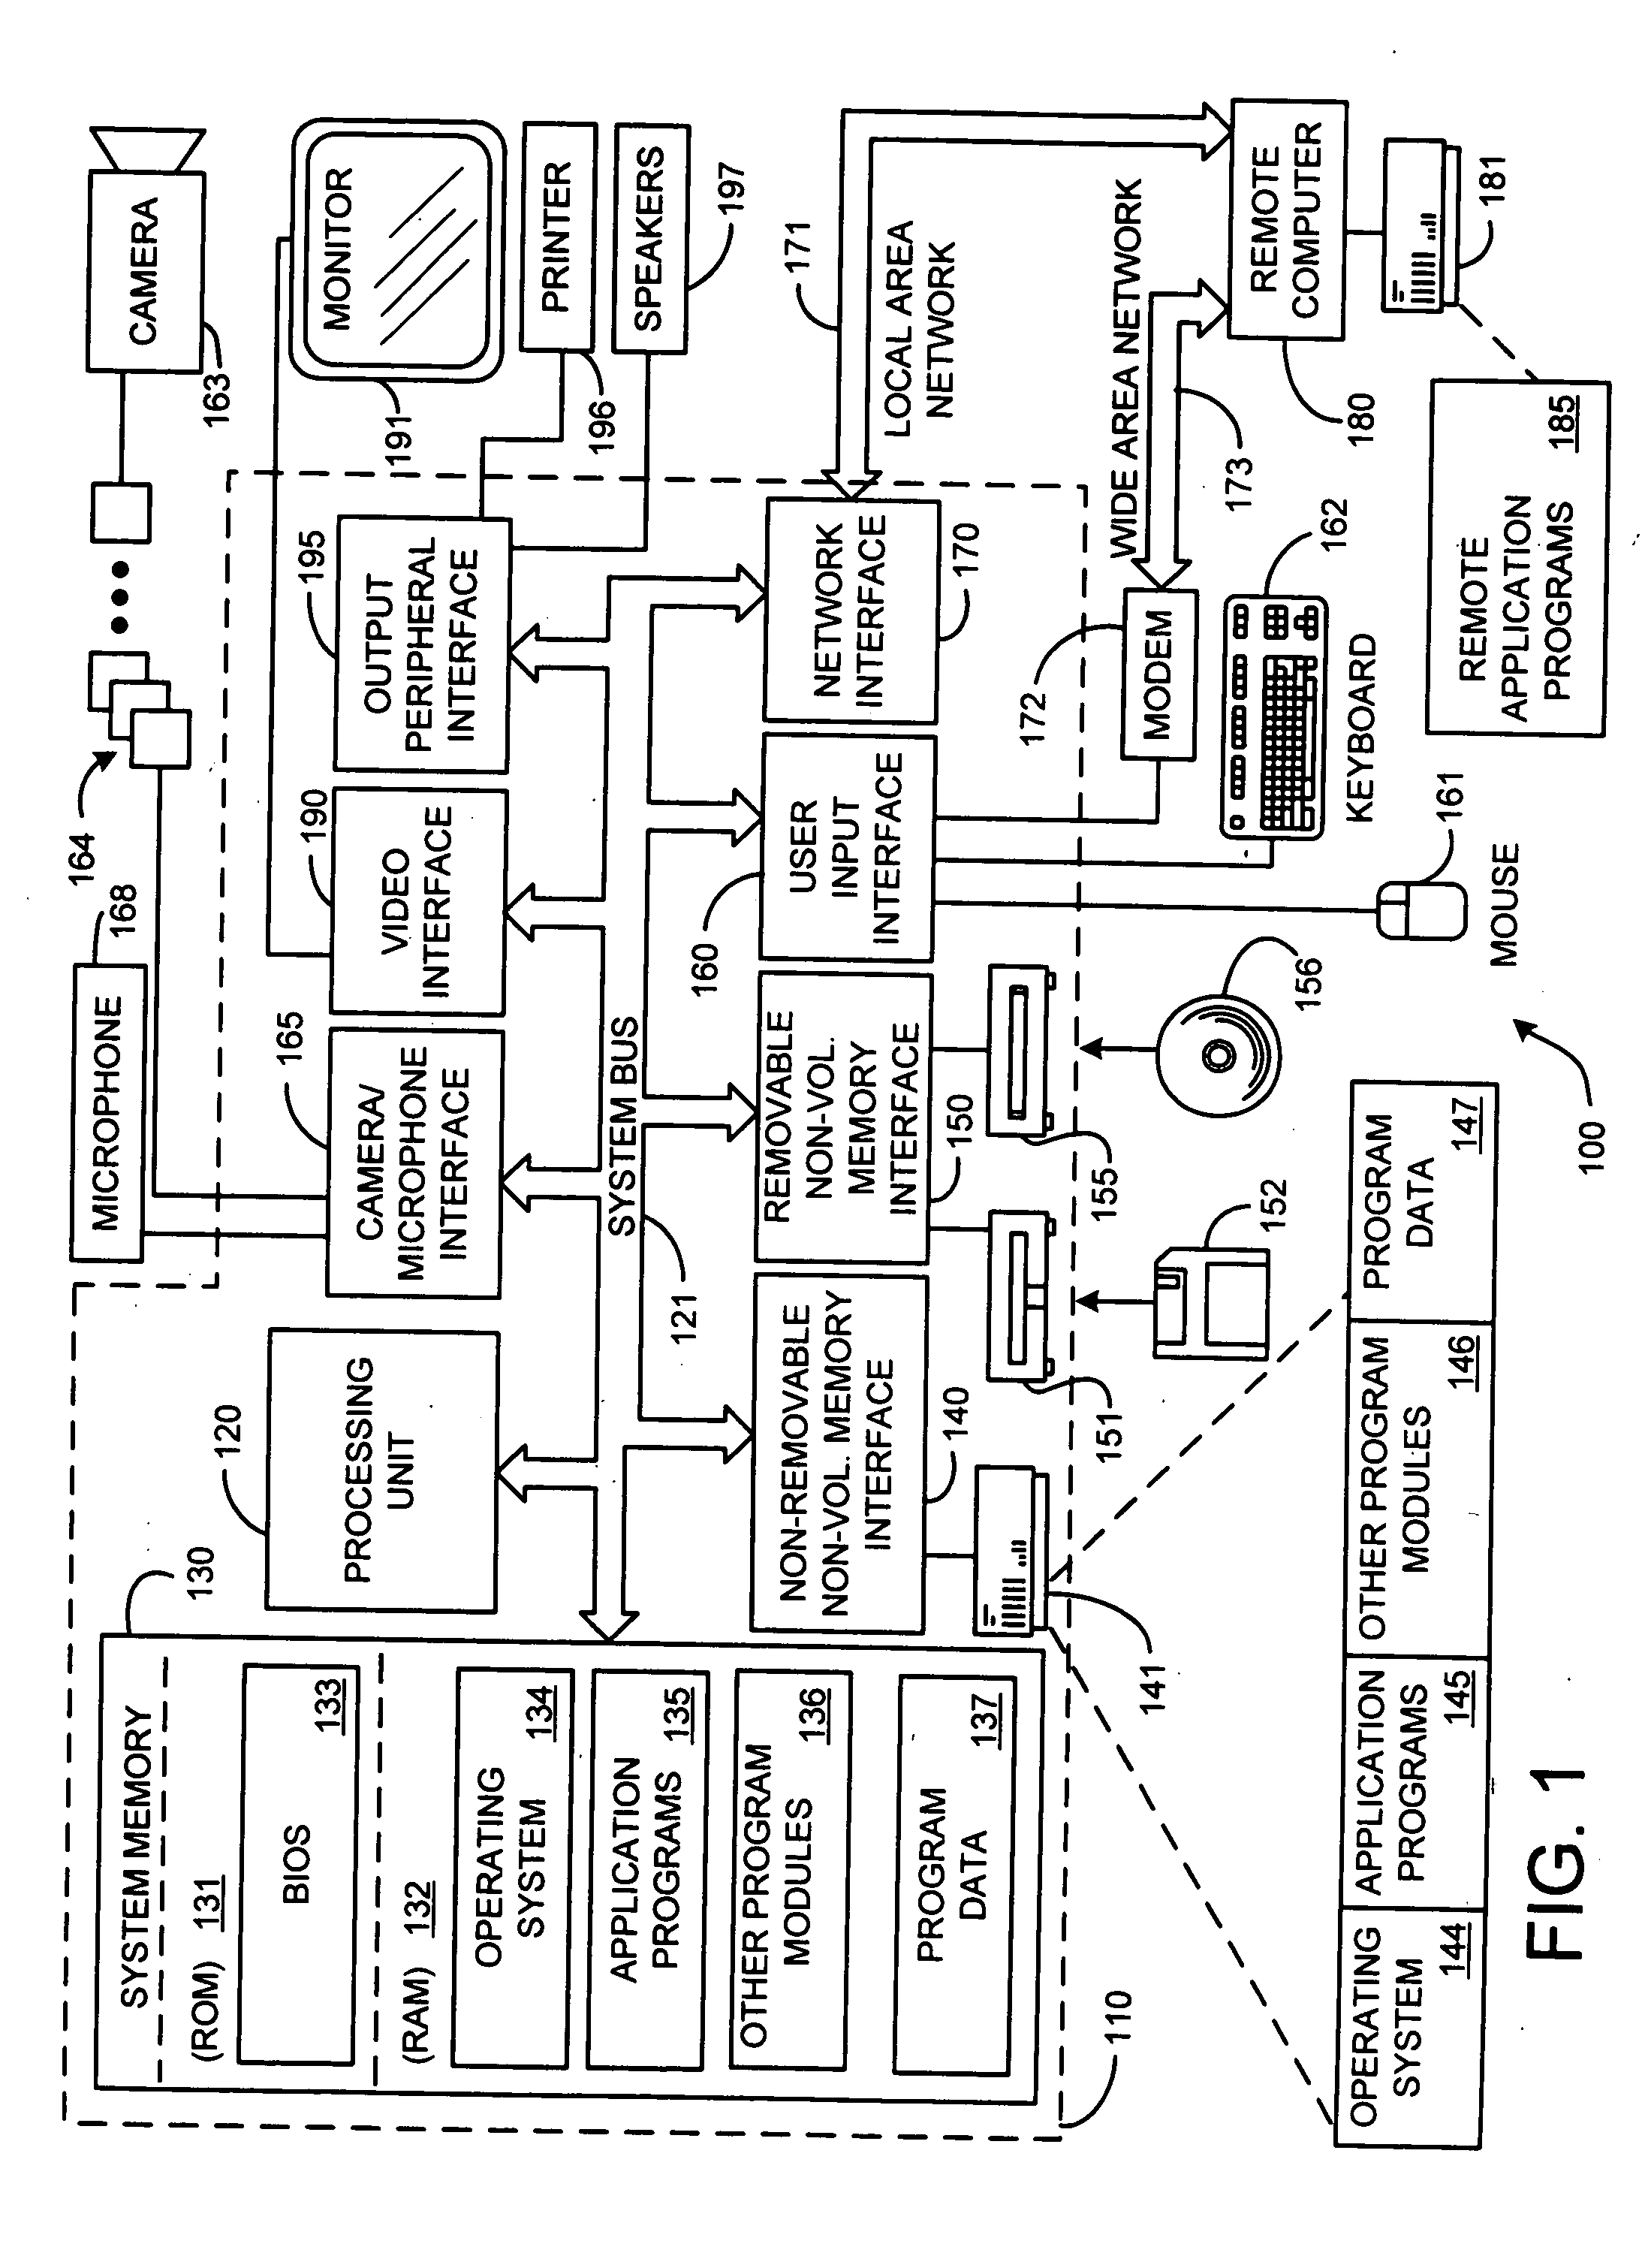 System and method for encoding mosaiced image data employing a reversible color transform